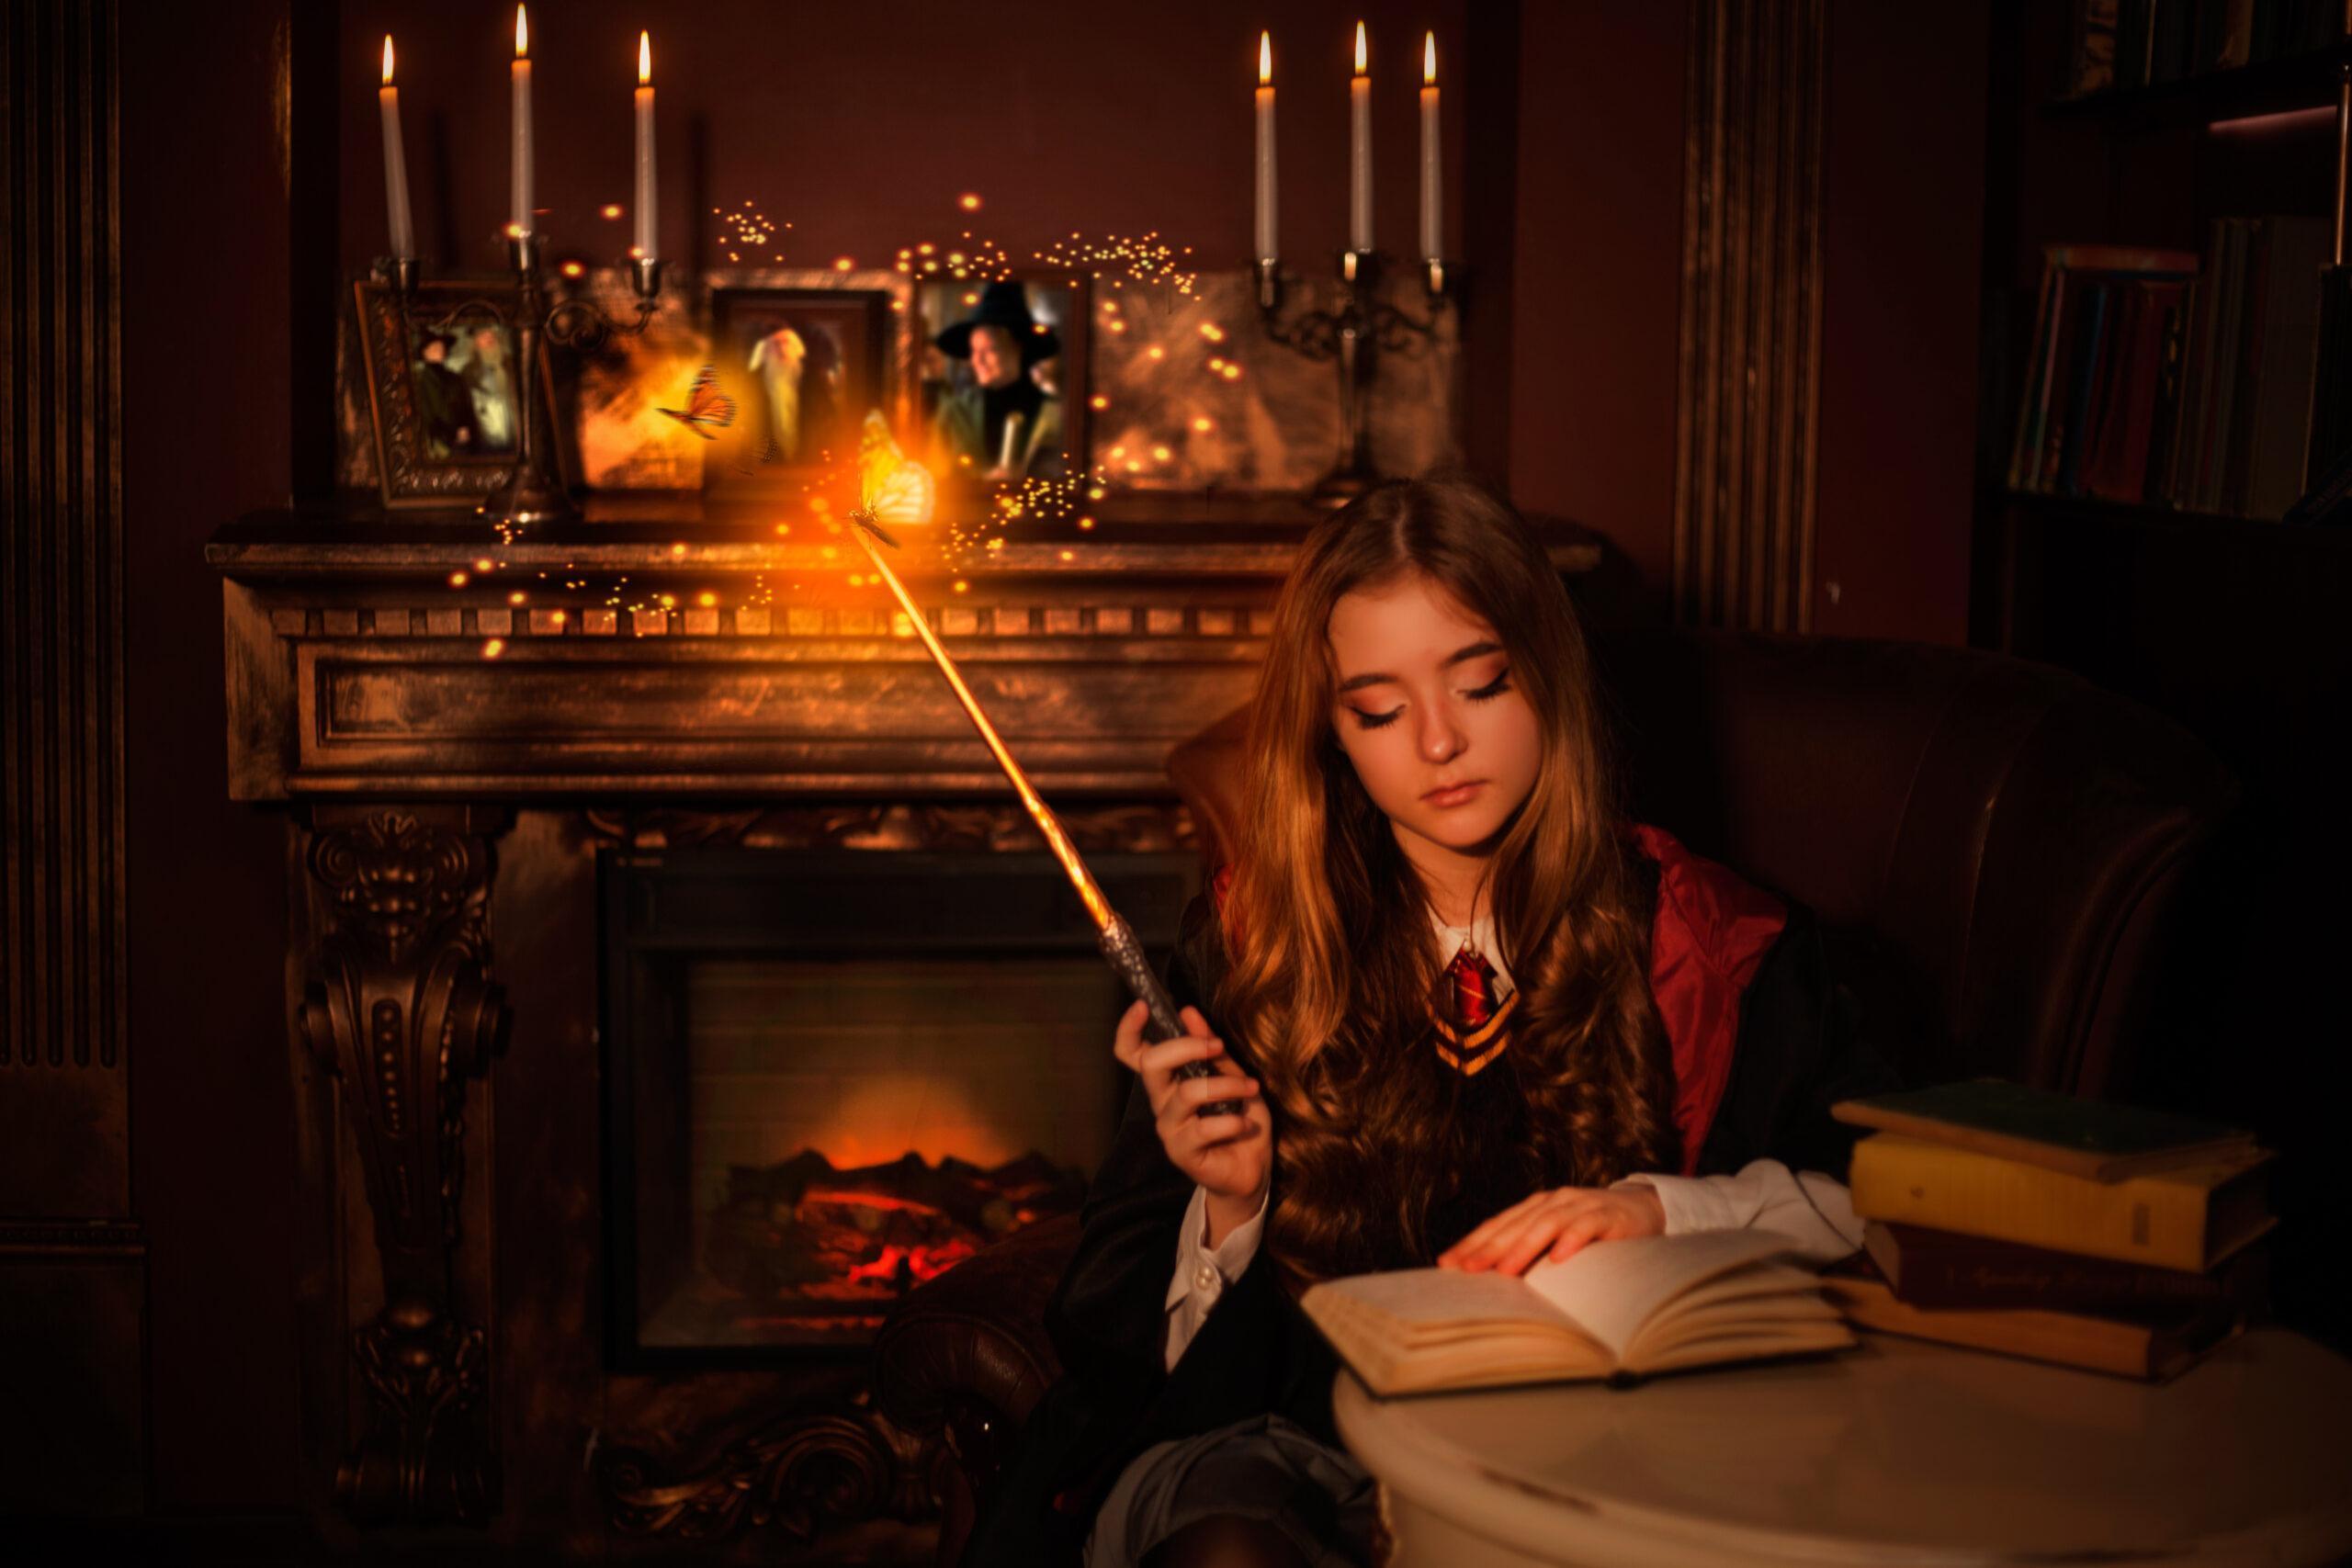 Young Harry Potter fan in costume reading a book while holding a wand